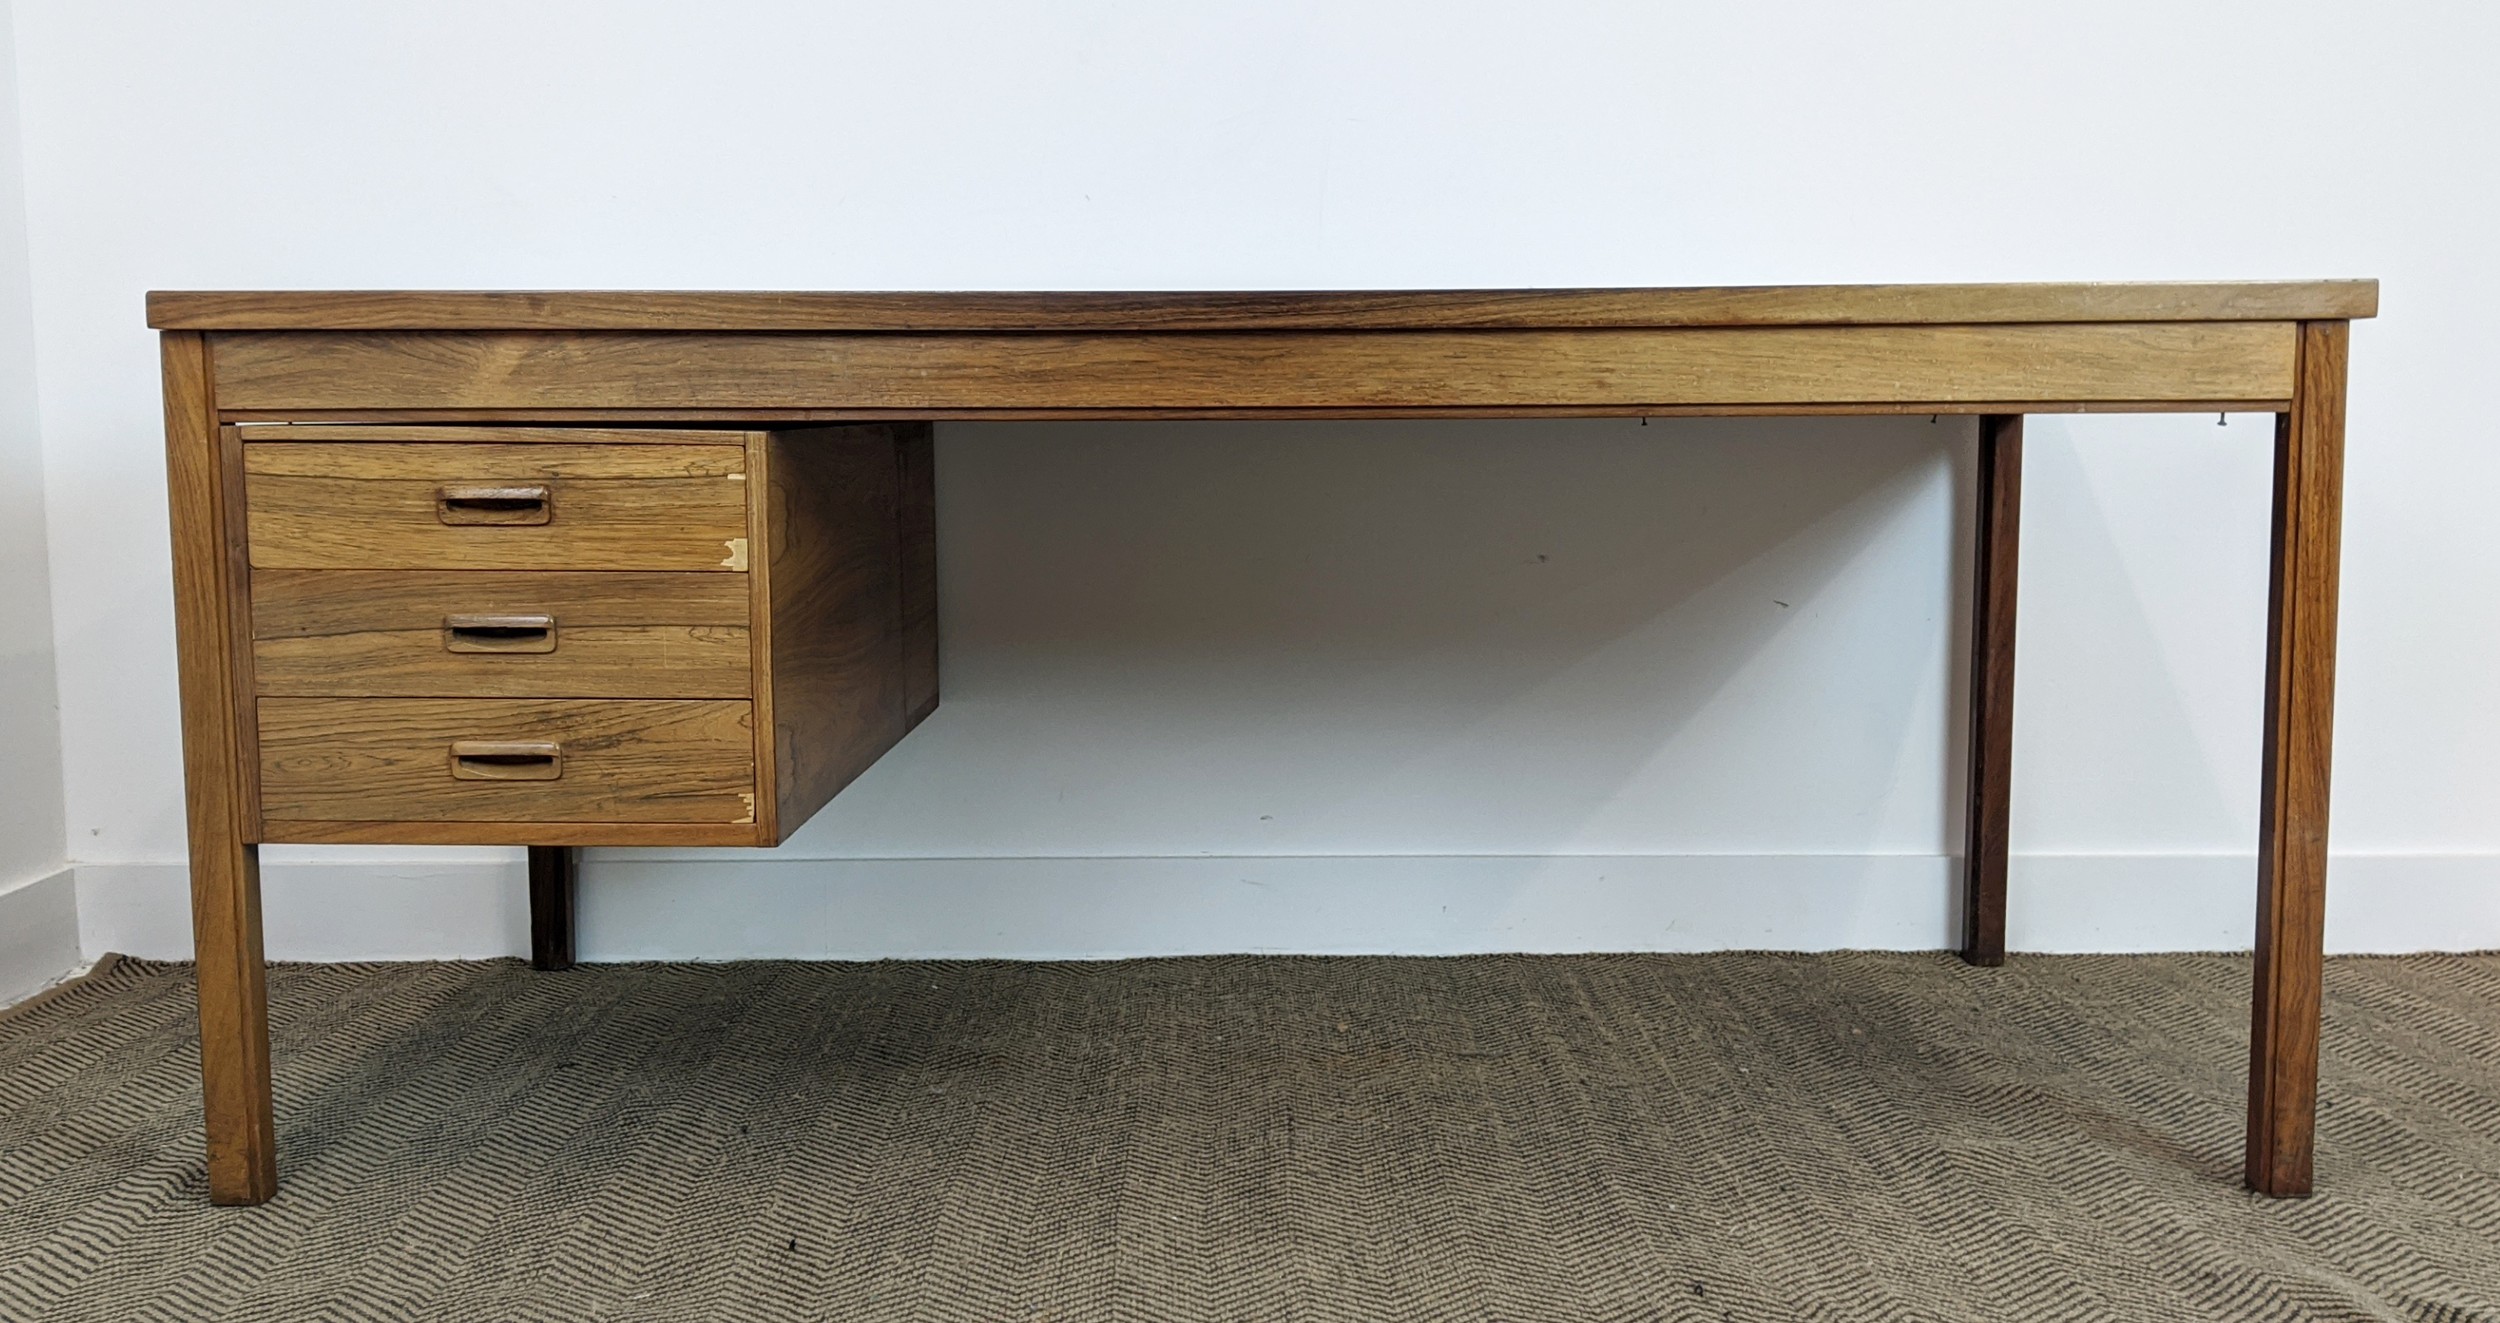 DESK, 171cm x 85.5cm x 73cm approx., with three drawers to one side. - Image 2 of 14